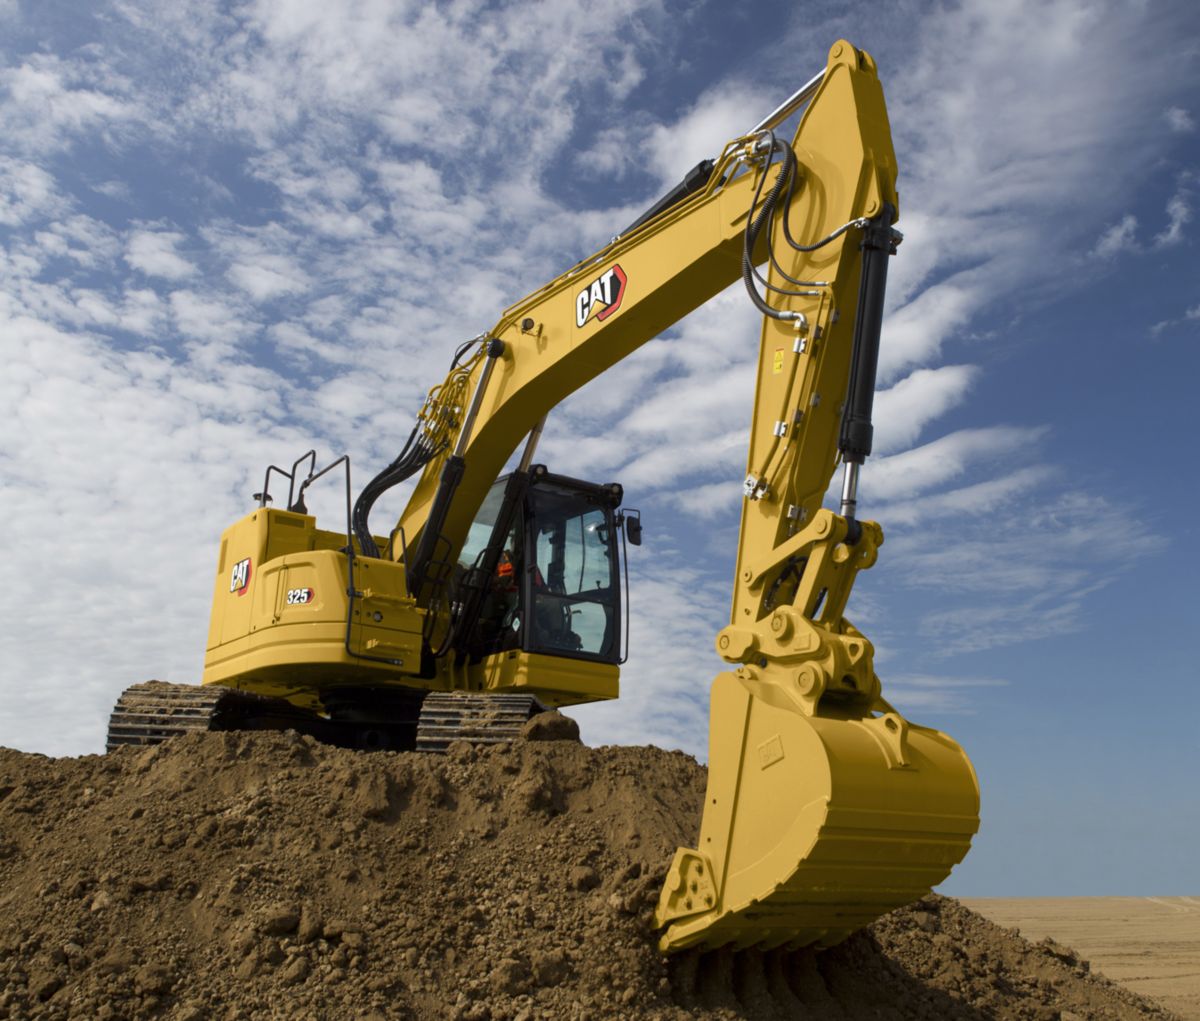 Compact radius design gives next gen Cat 325 Excavator better performance and Safety